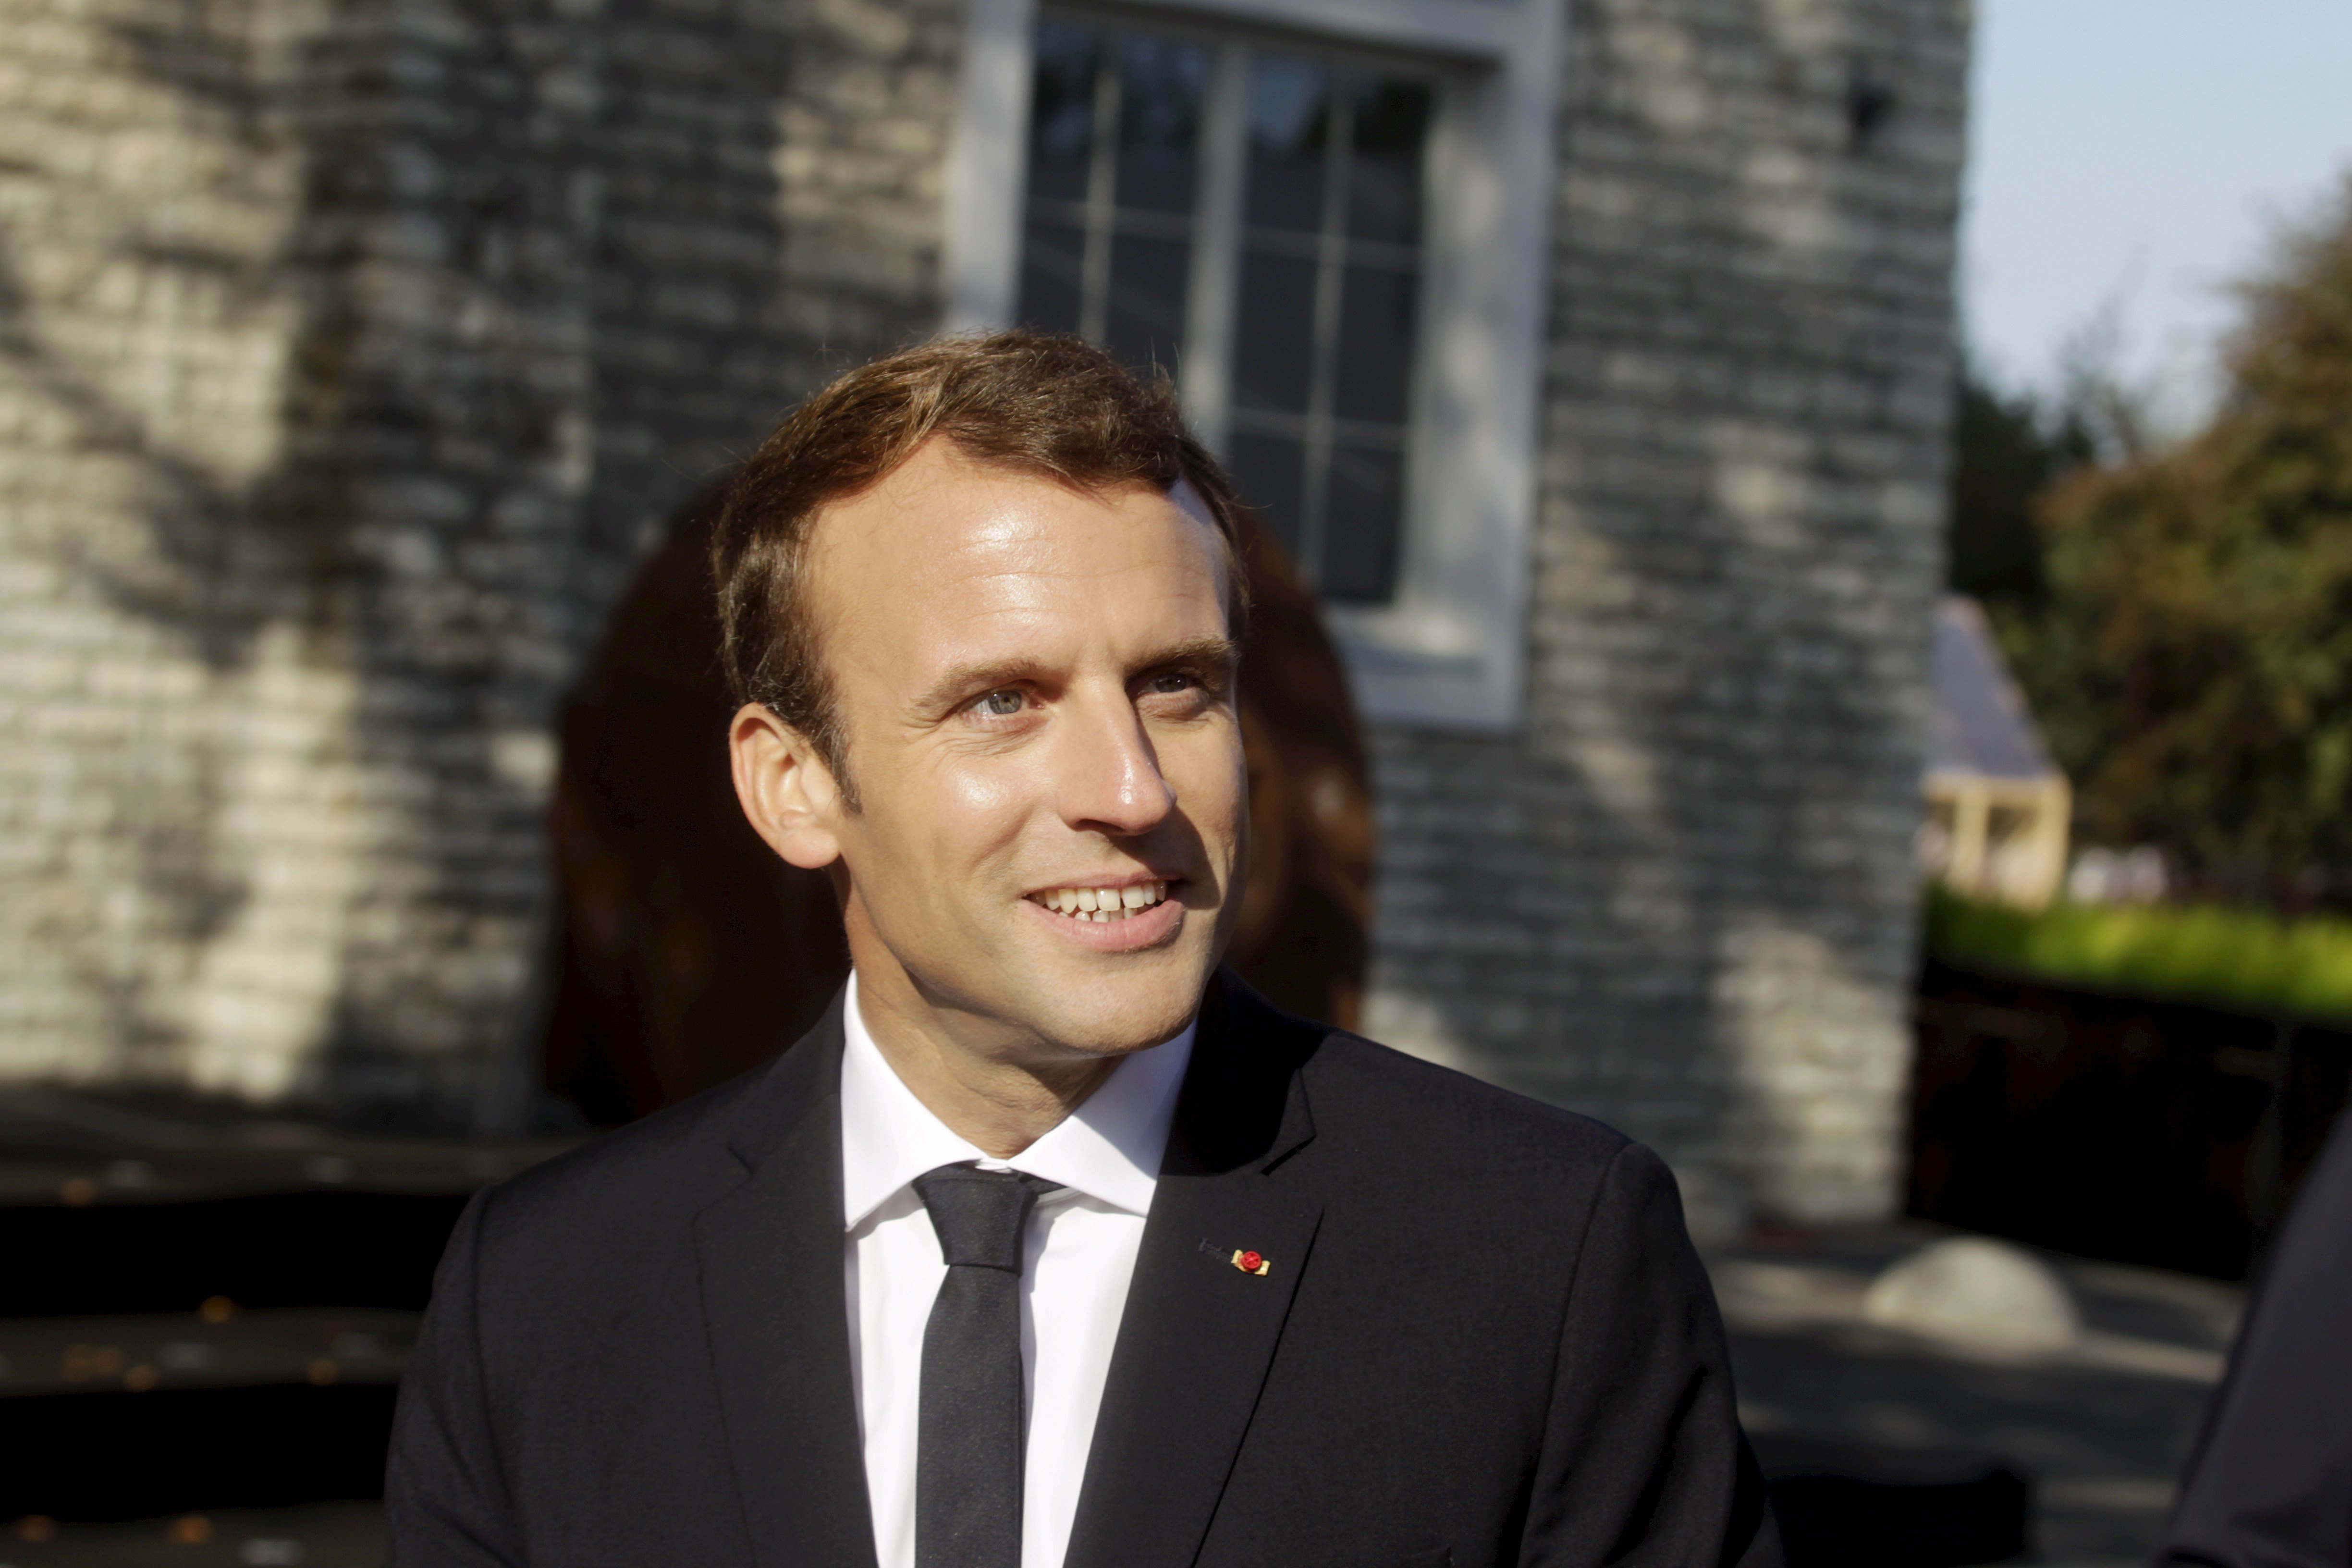 French president Emmanuel Macron calls for "dialogue and serenity" towards Catalan referendum